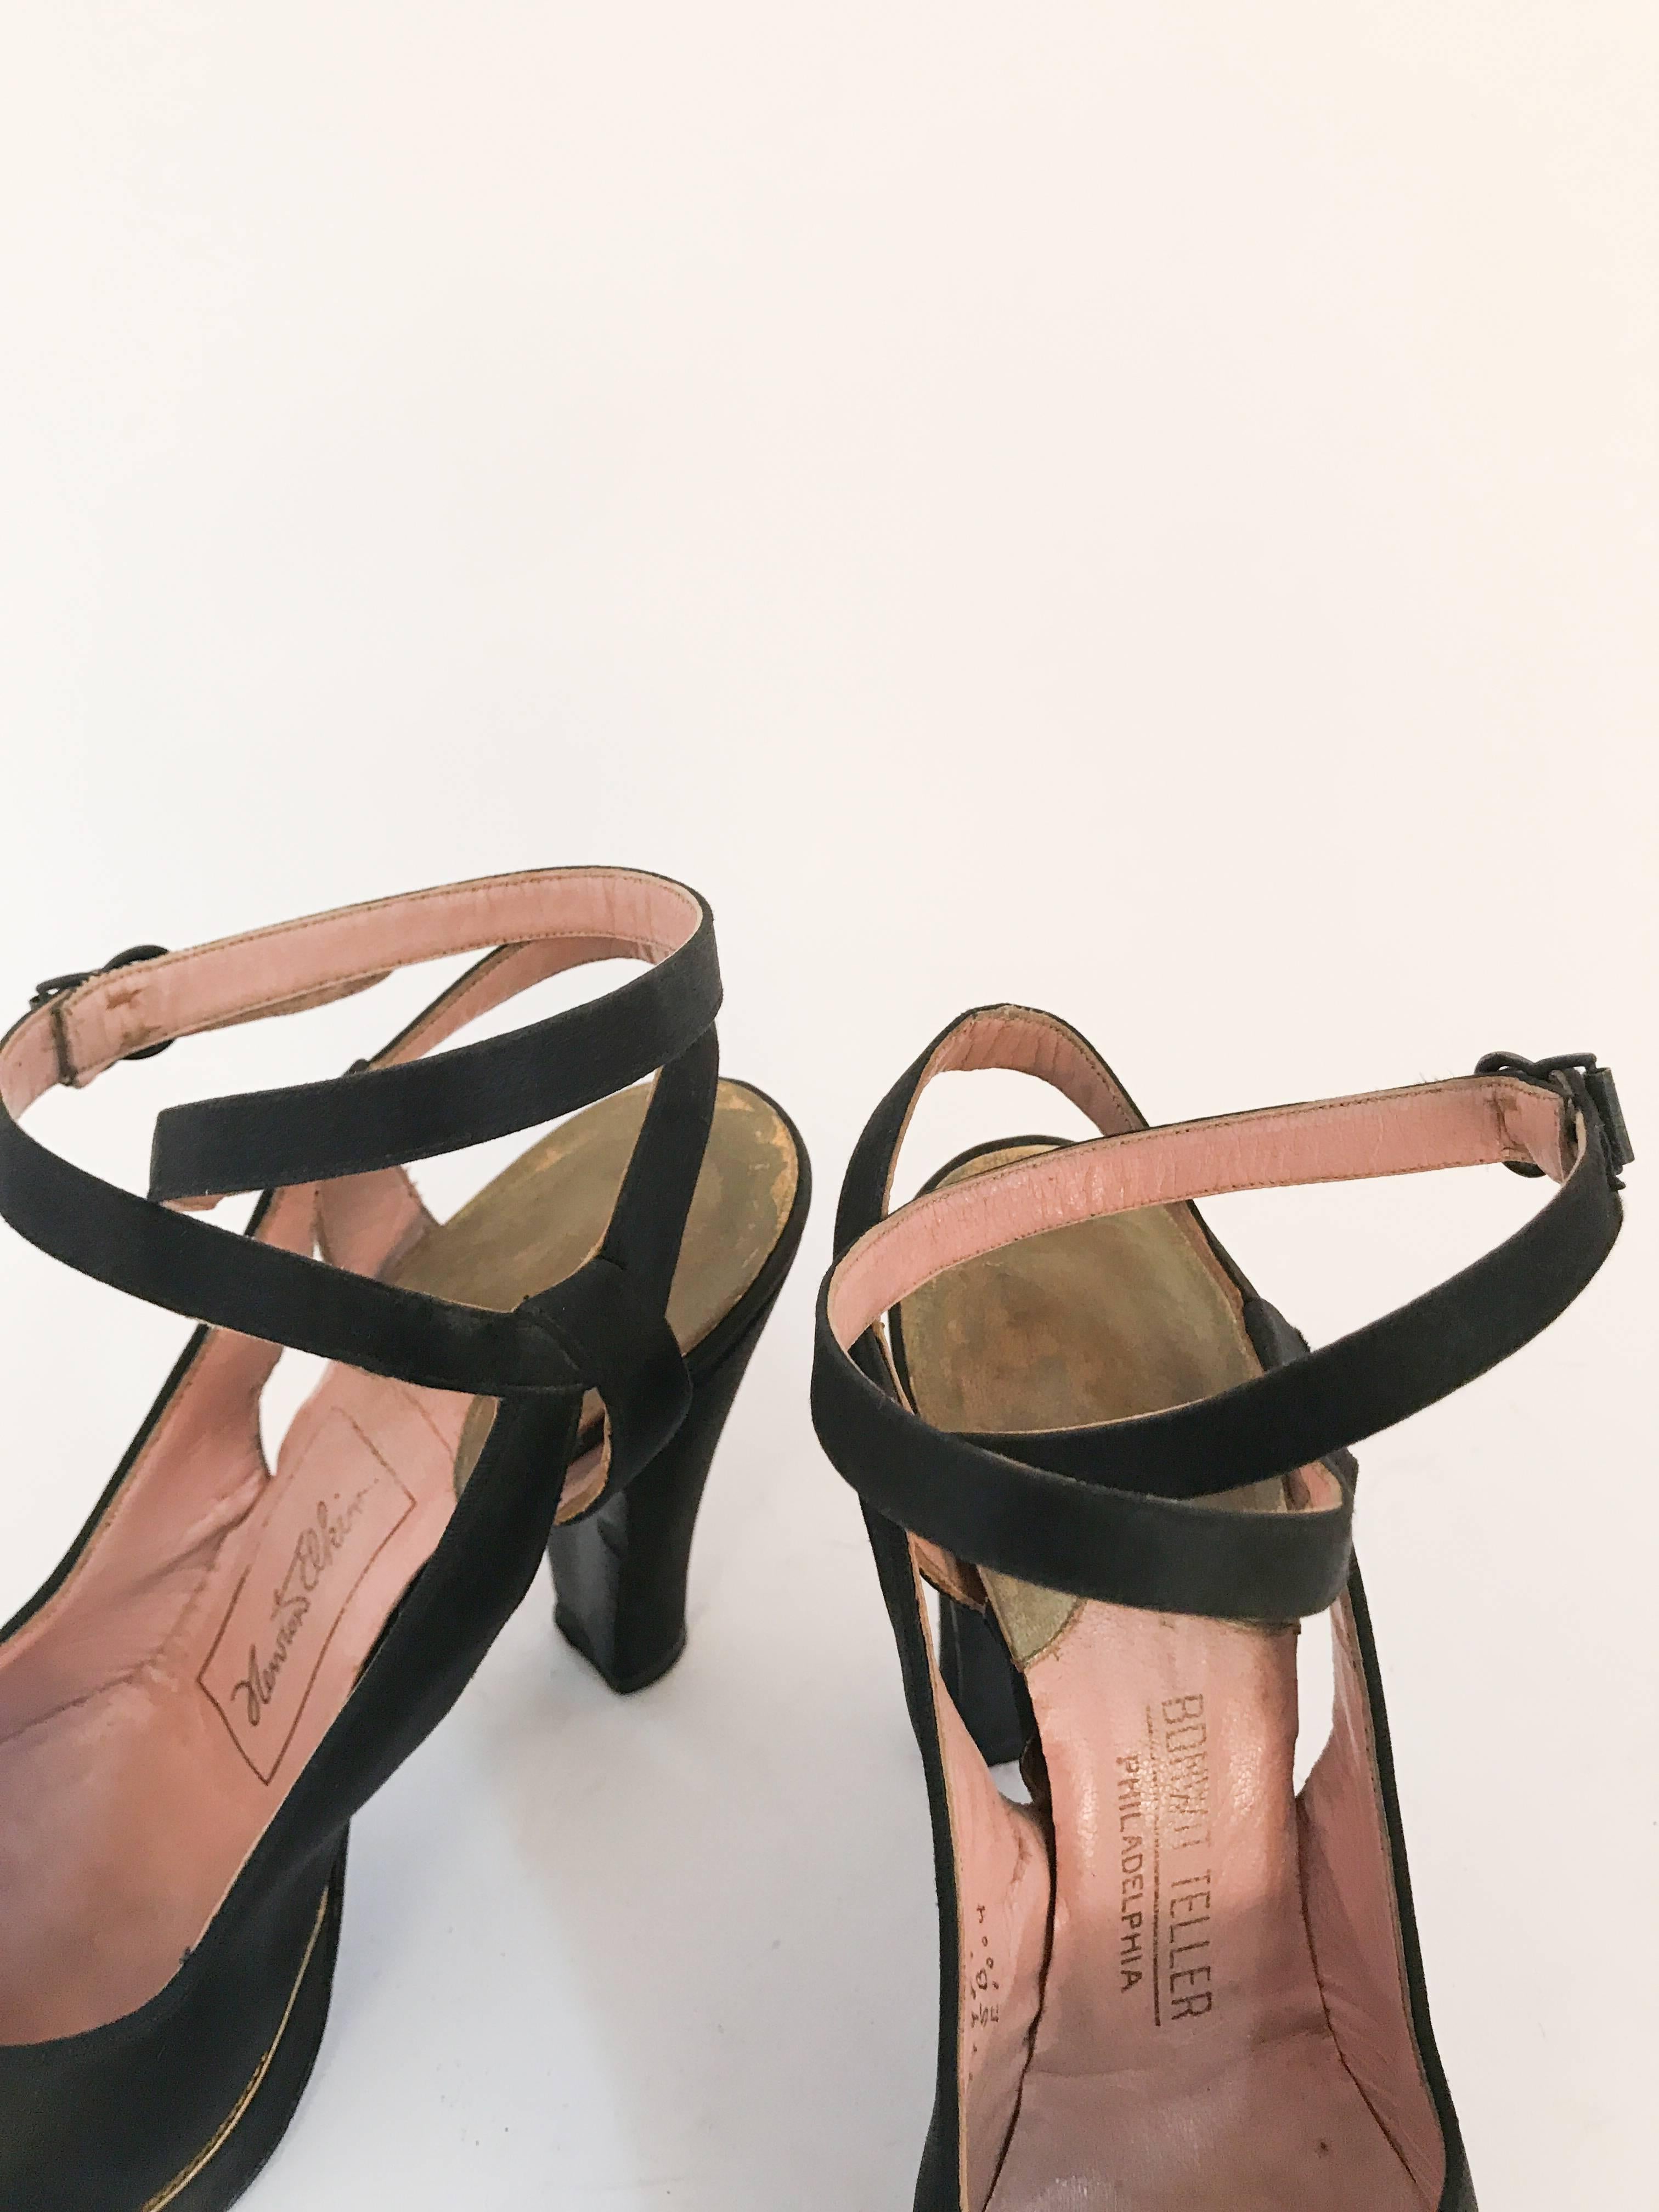 1940s Black and Gold Satin Strap Heels. Black satin heals with gold leather trim and cross-over ankle strap with buckle off to the side. 